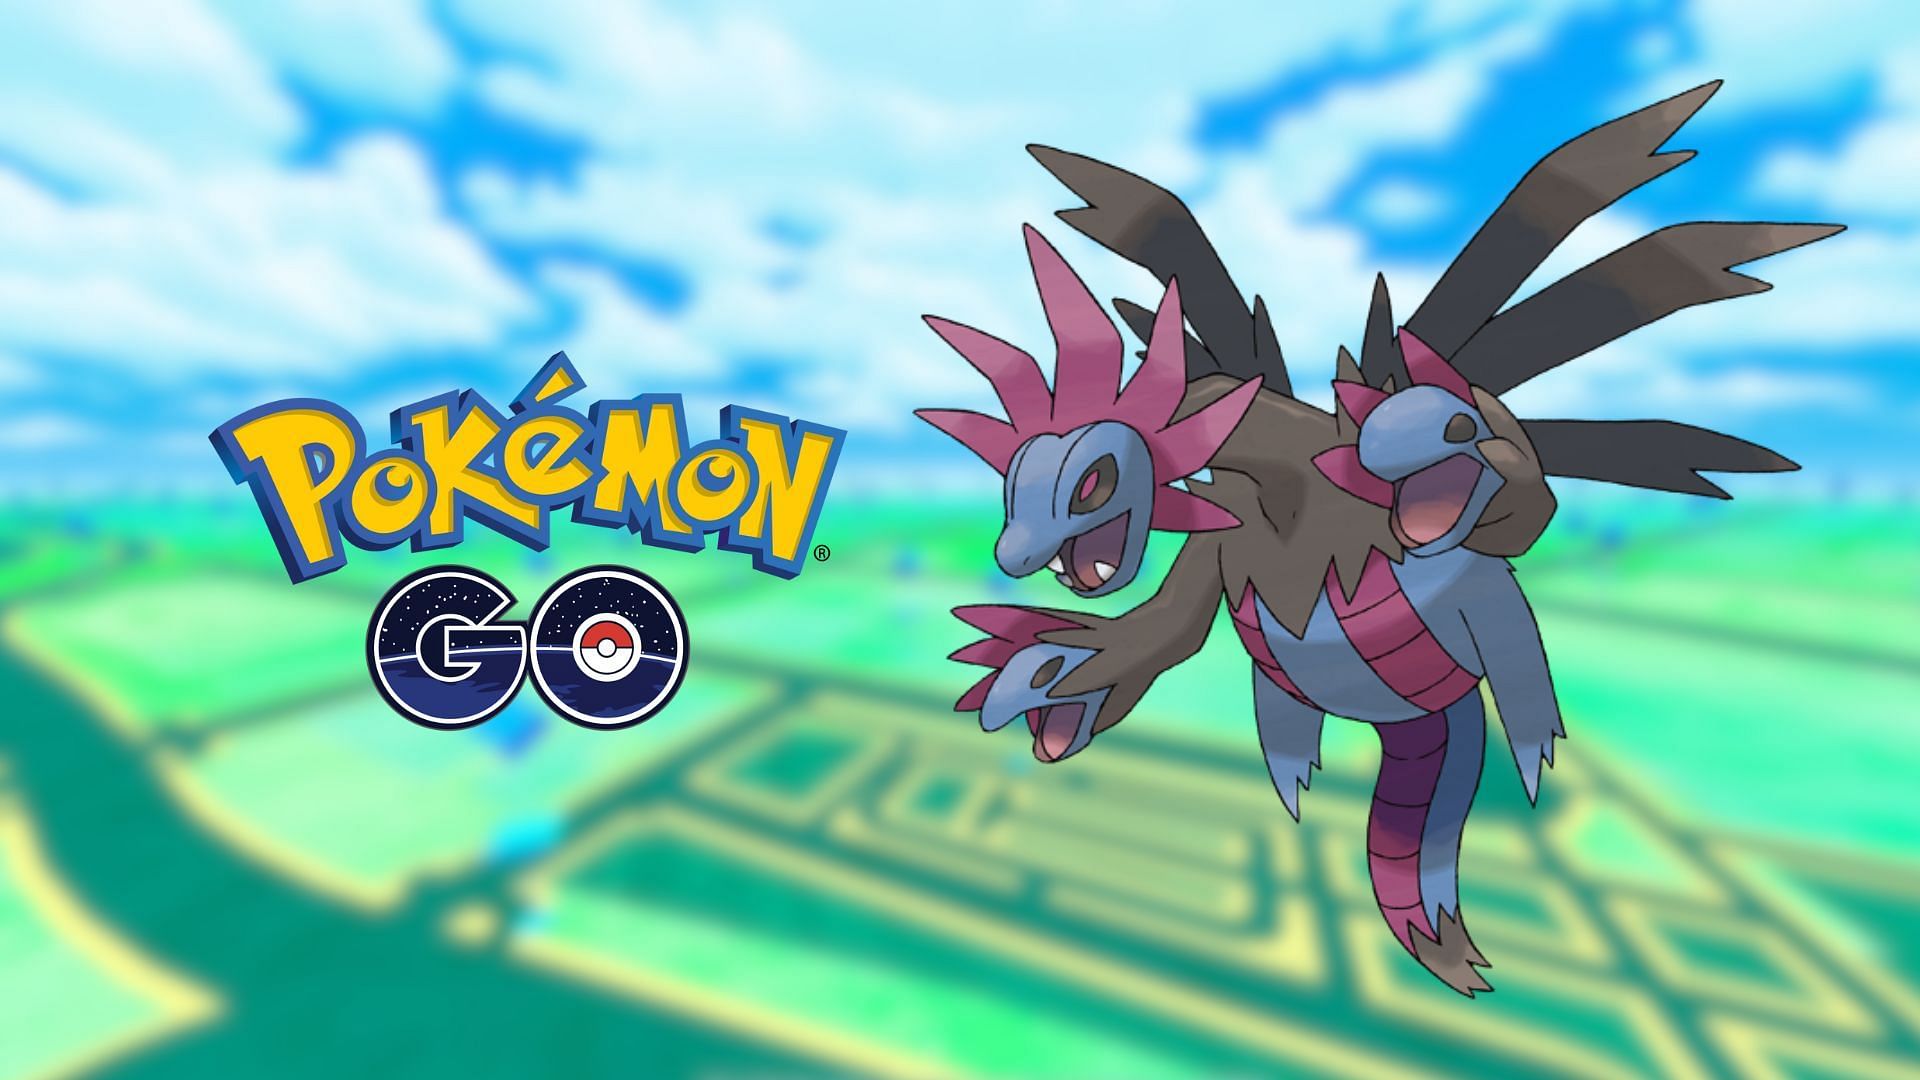 Pokemon GO Hydreigon: Best moveset, counters, and is it any good?